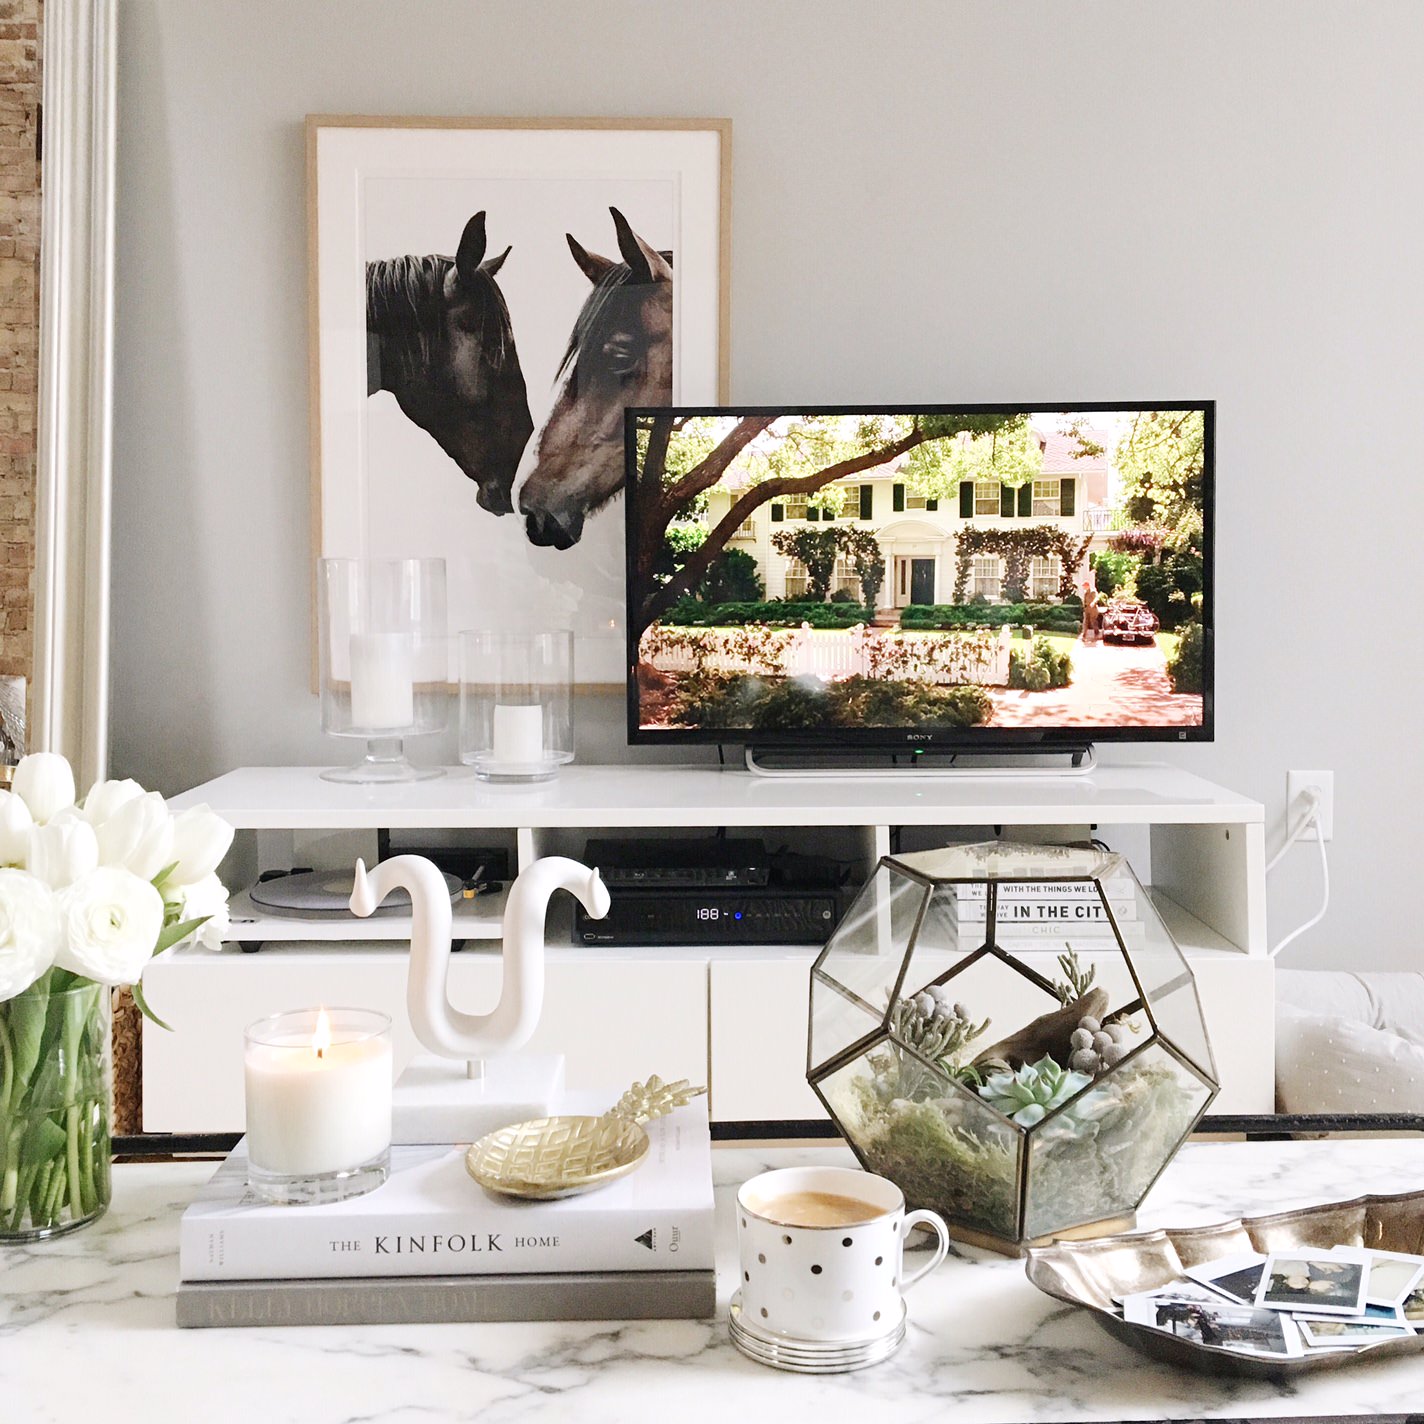 My Lakeview Apartment Tour - media console styling